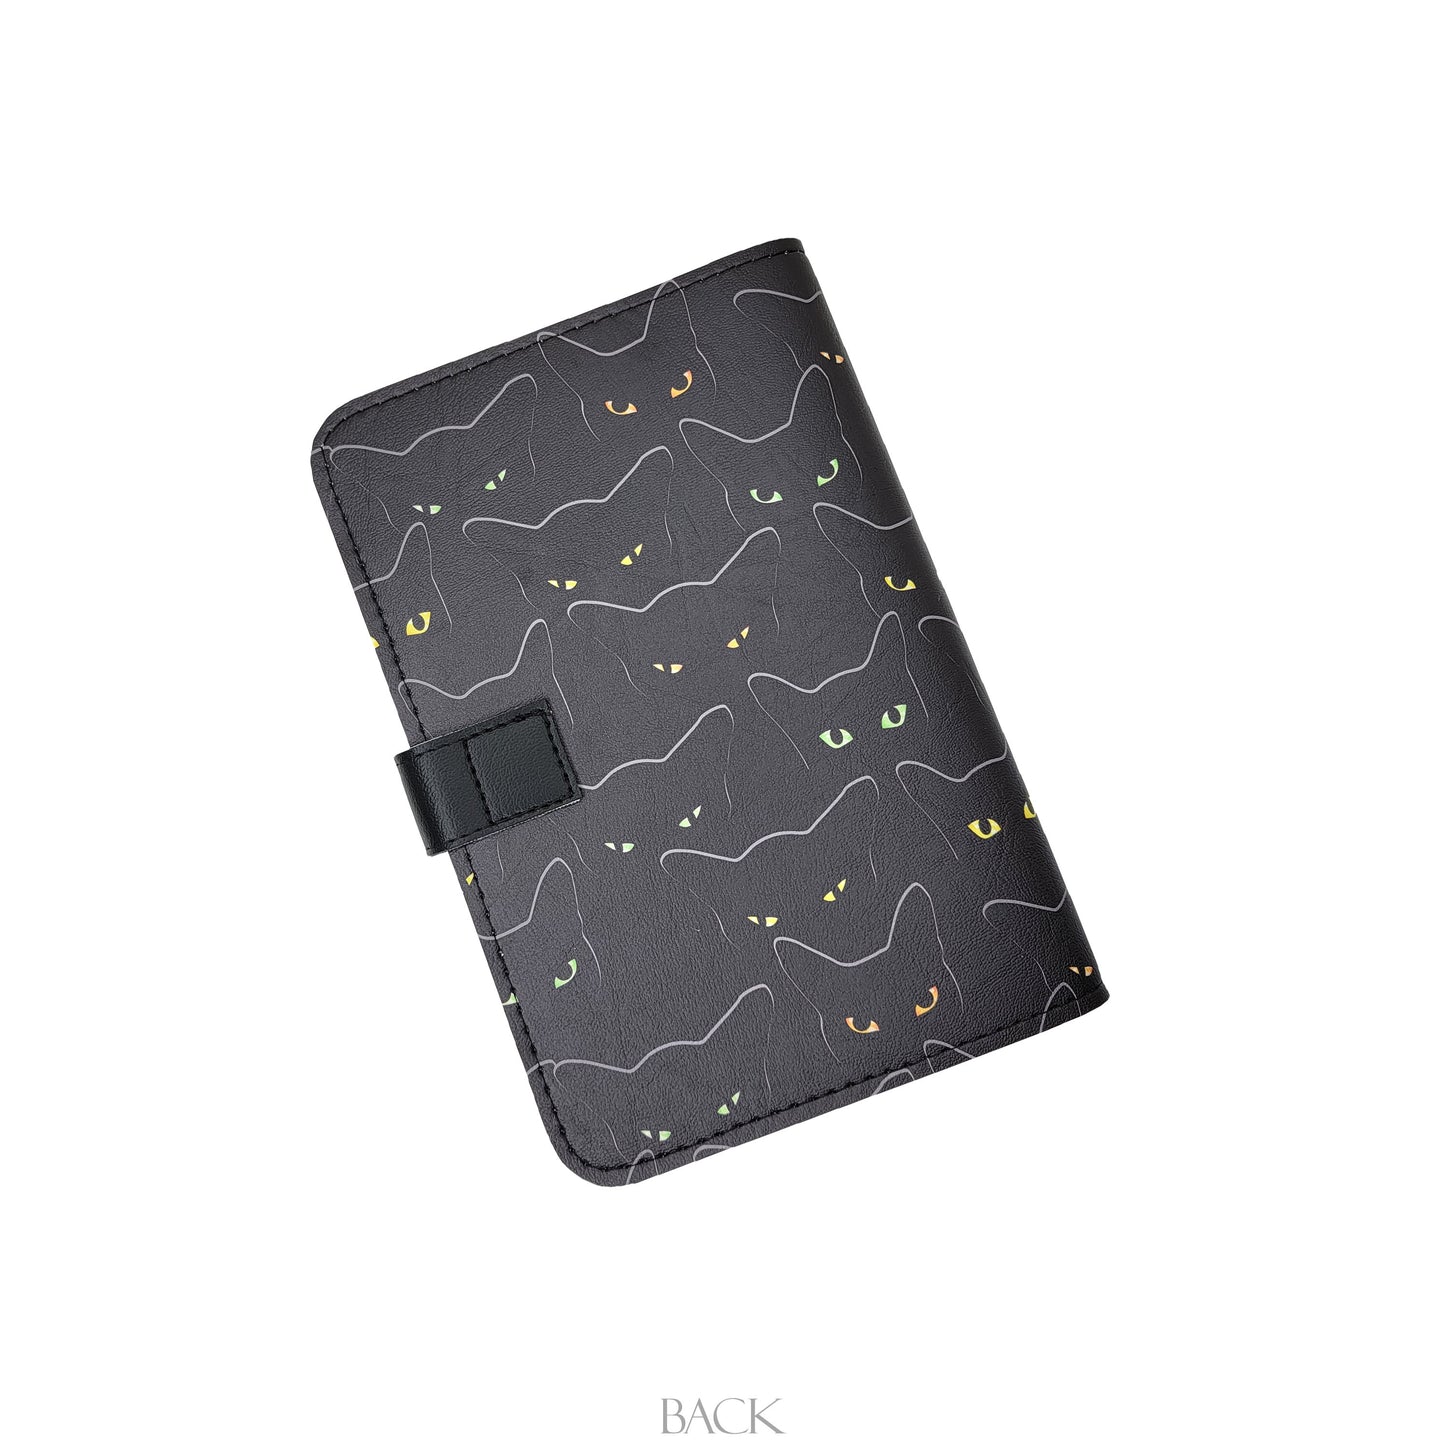 Black Cats- Notebook & Cover